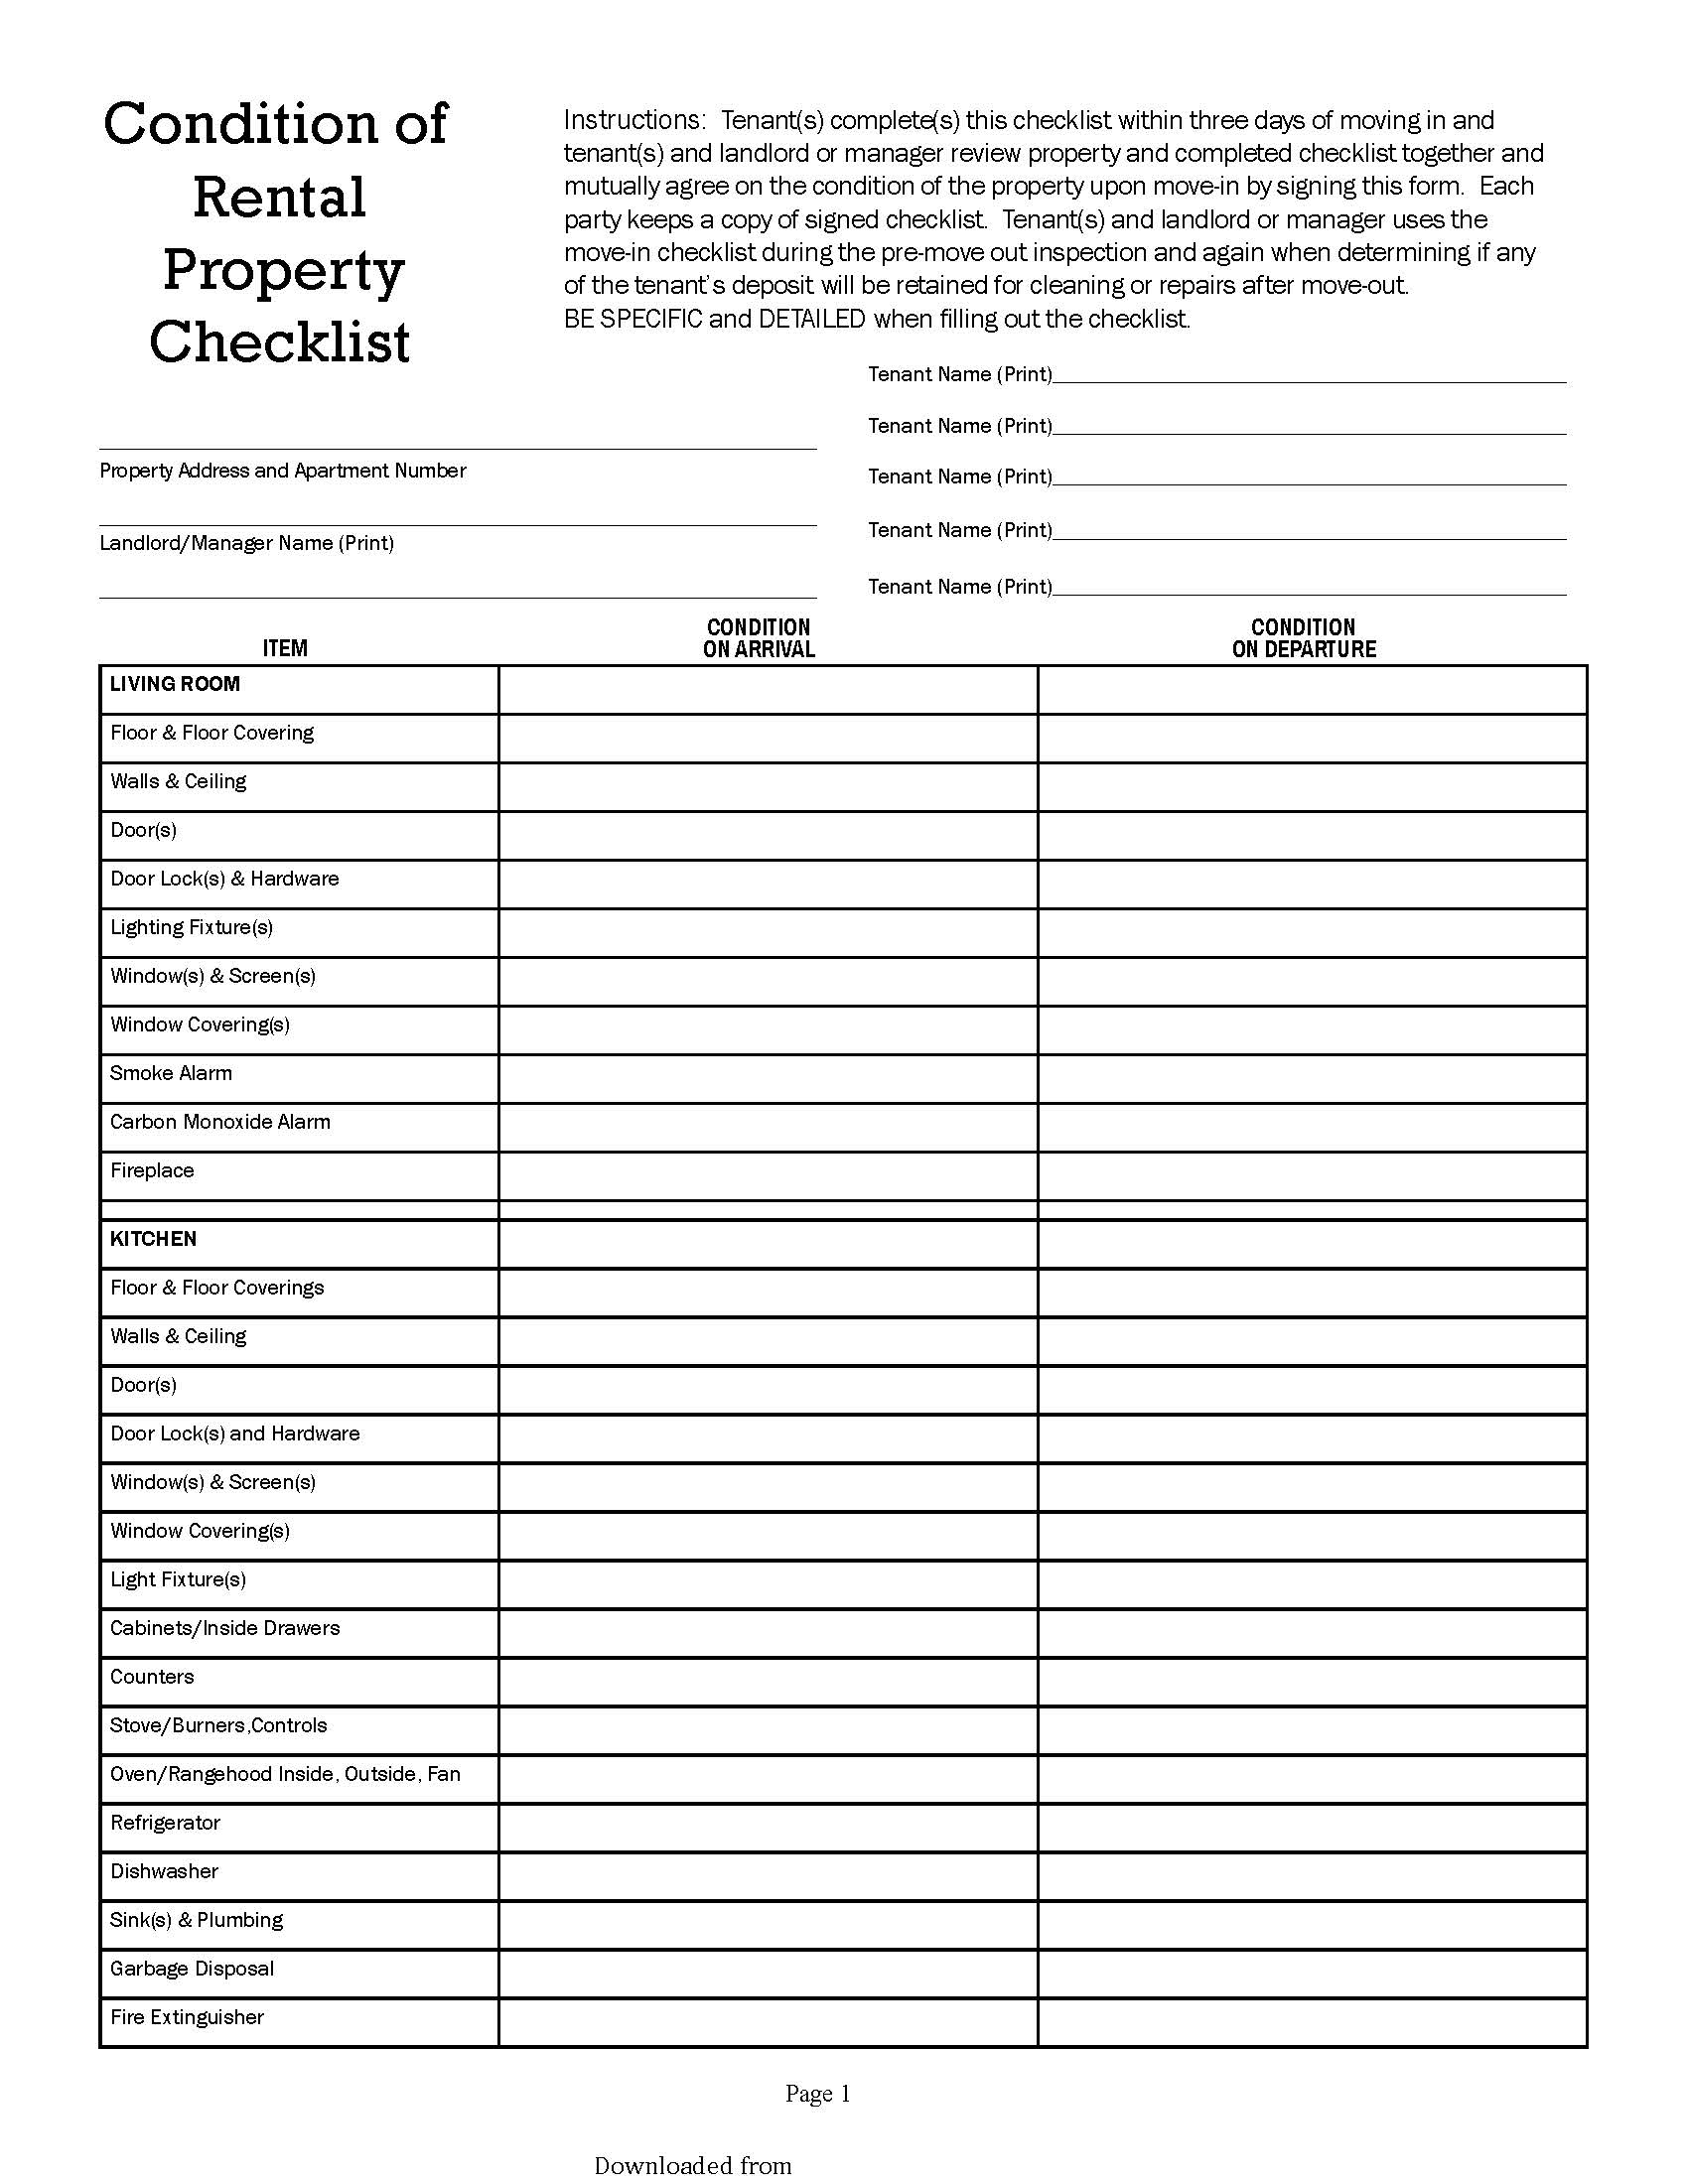 Condition Of Rental Property Checklist - PDF Format  e-database With Condition Of Rental Property Checklist Template